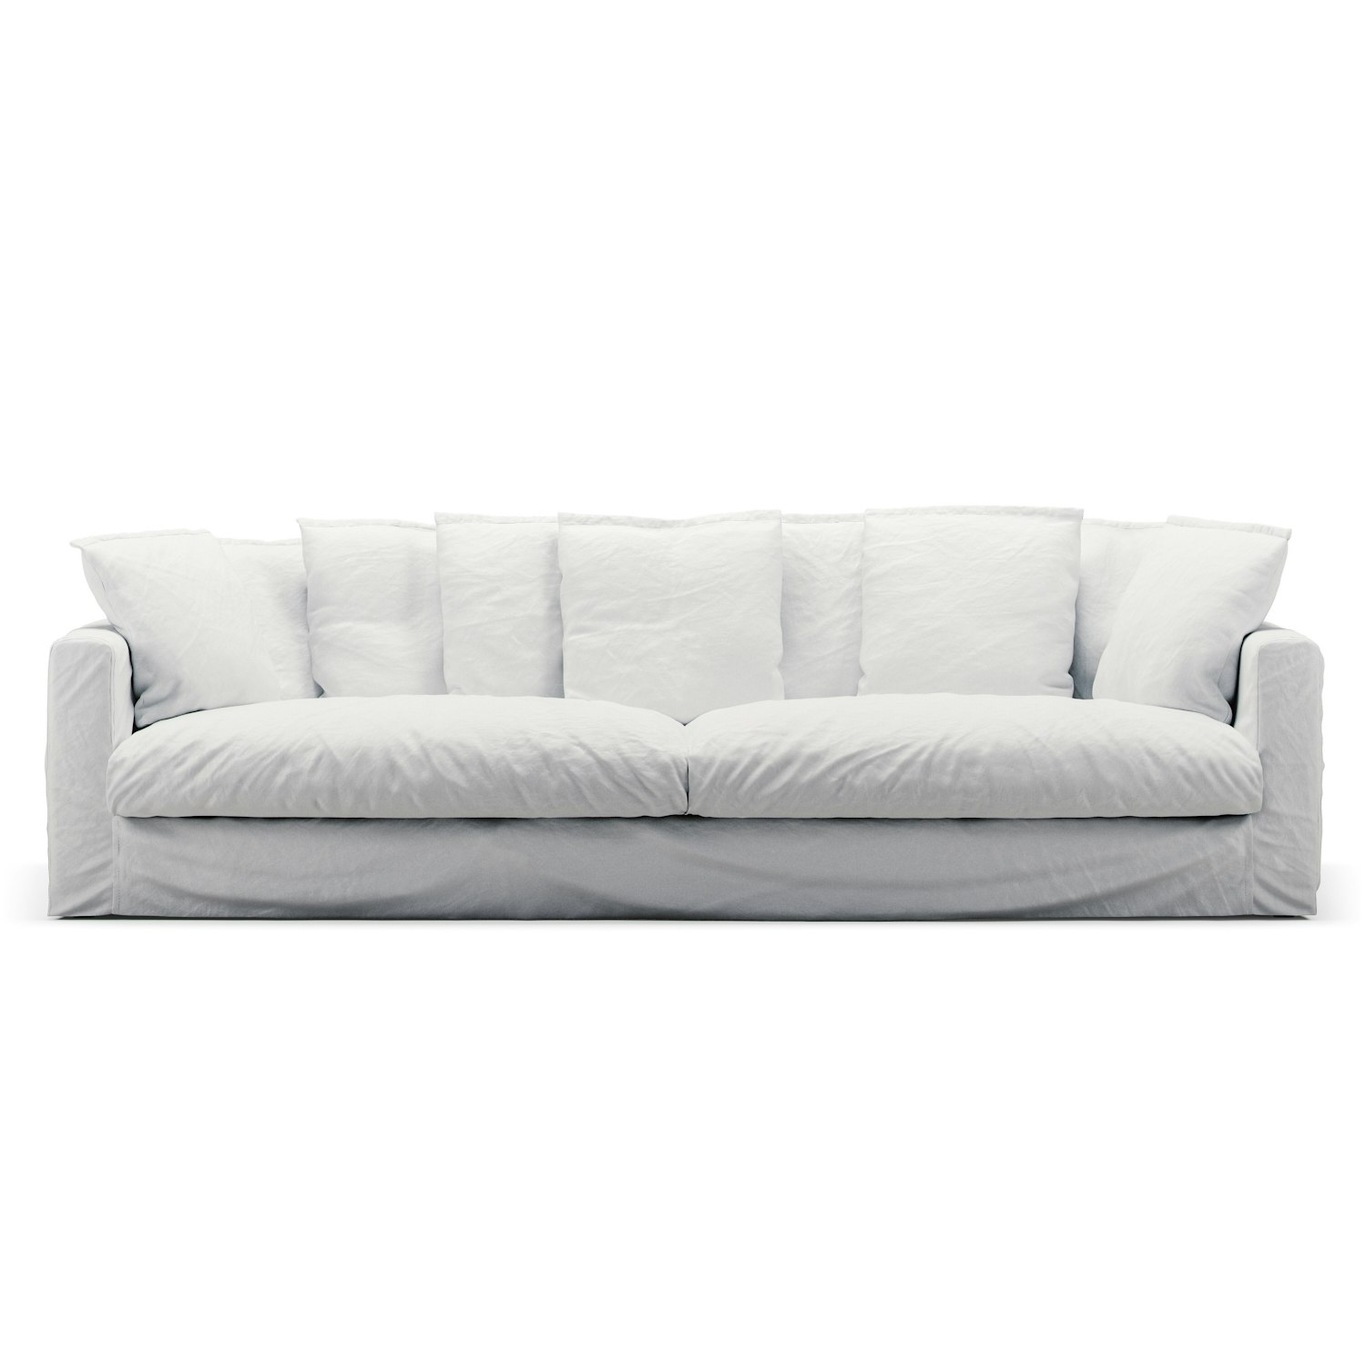 Le Grand Air Upholstery 4-Seater Cotton, White